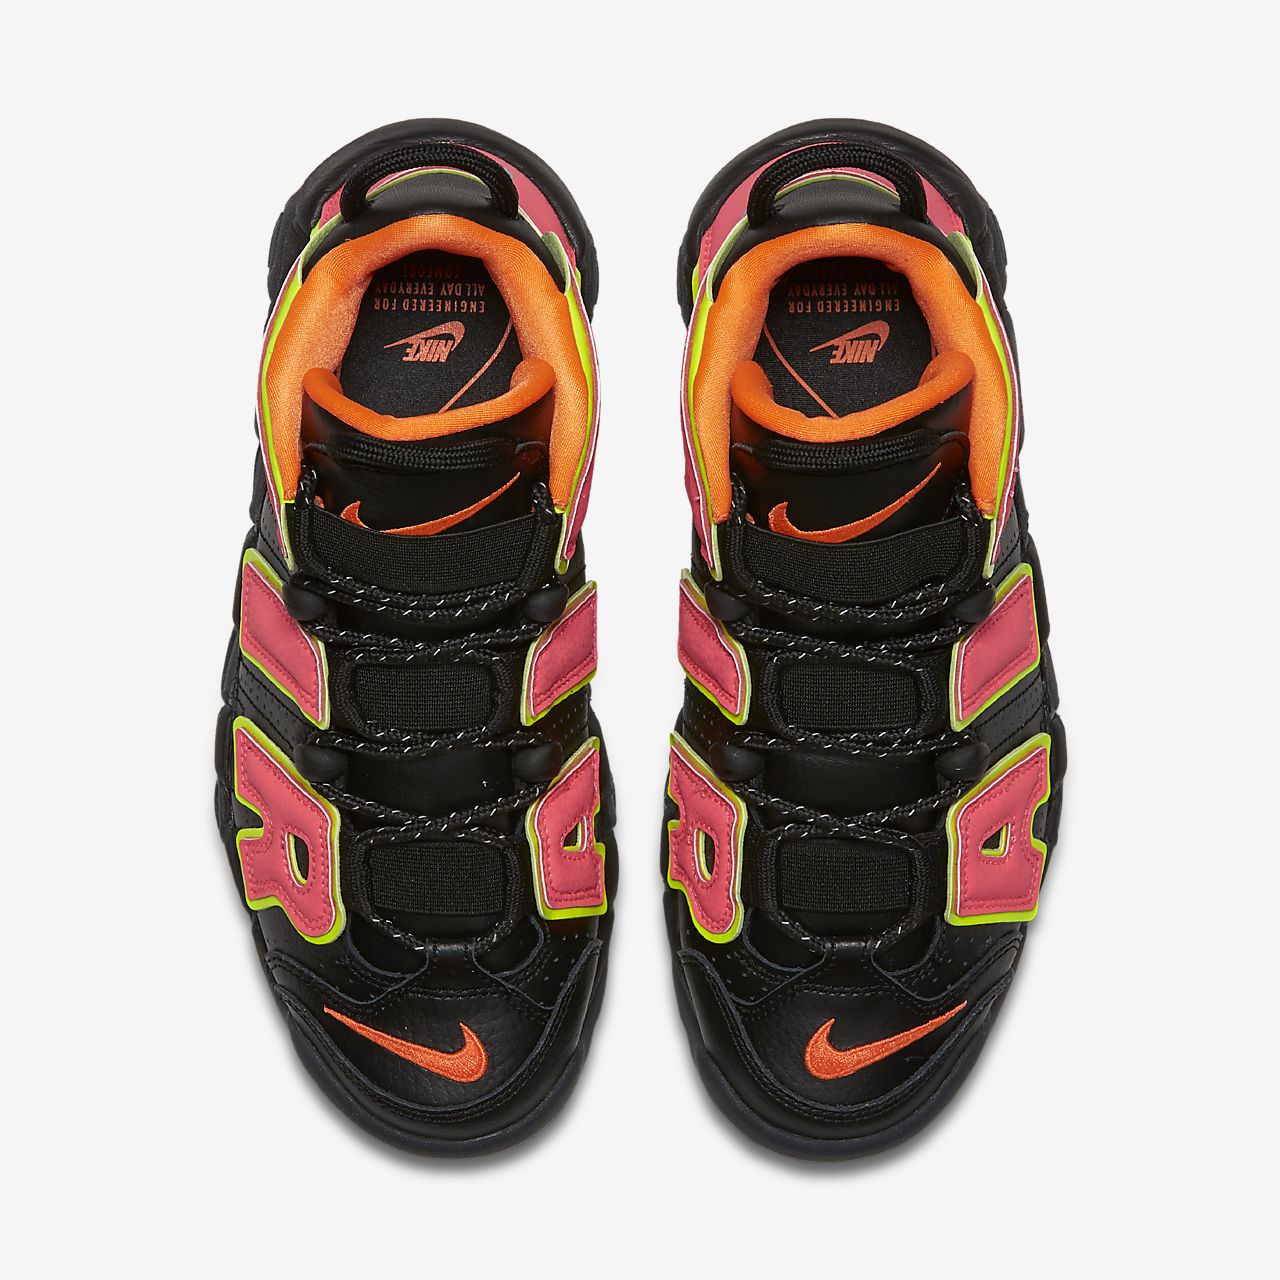 04-nike-womens-air-more-uptempo-hot-punch-917593-002